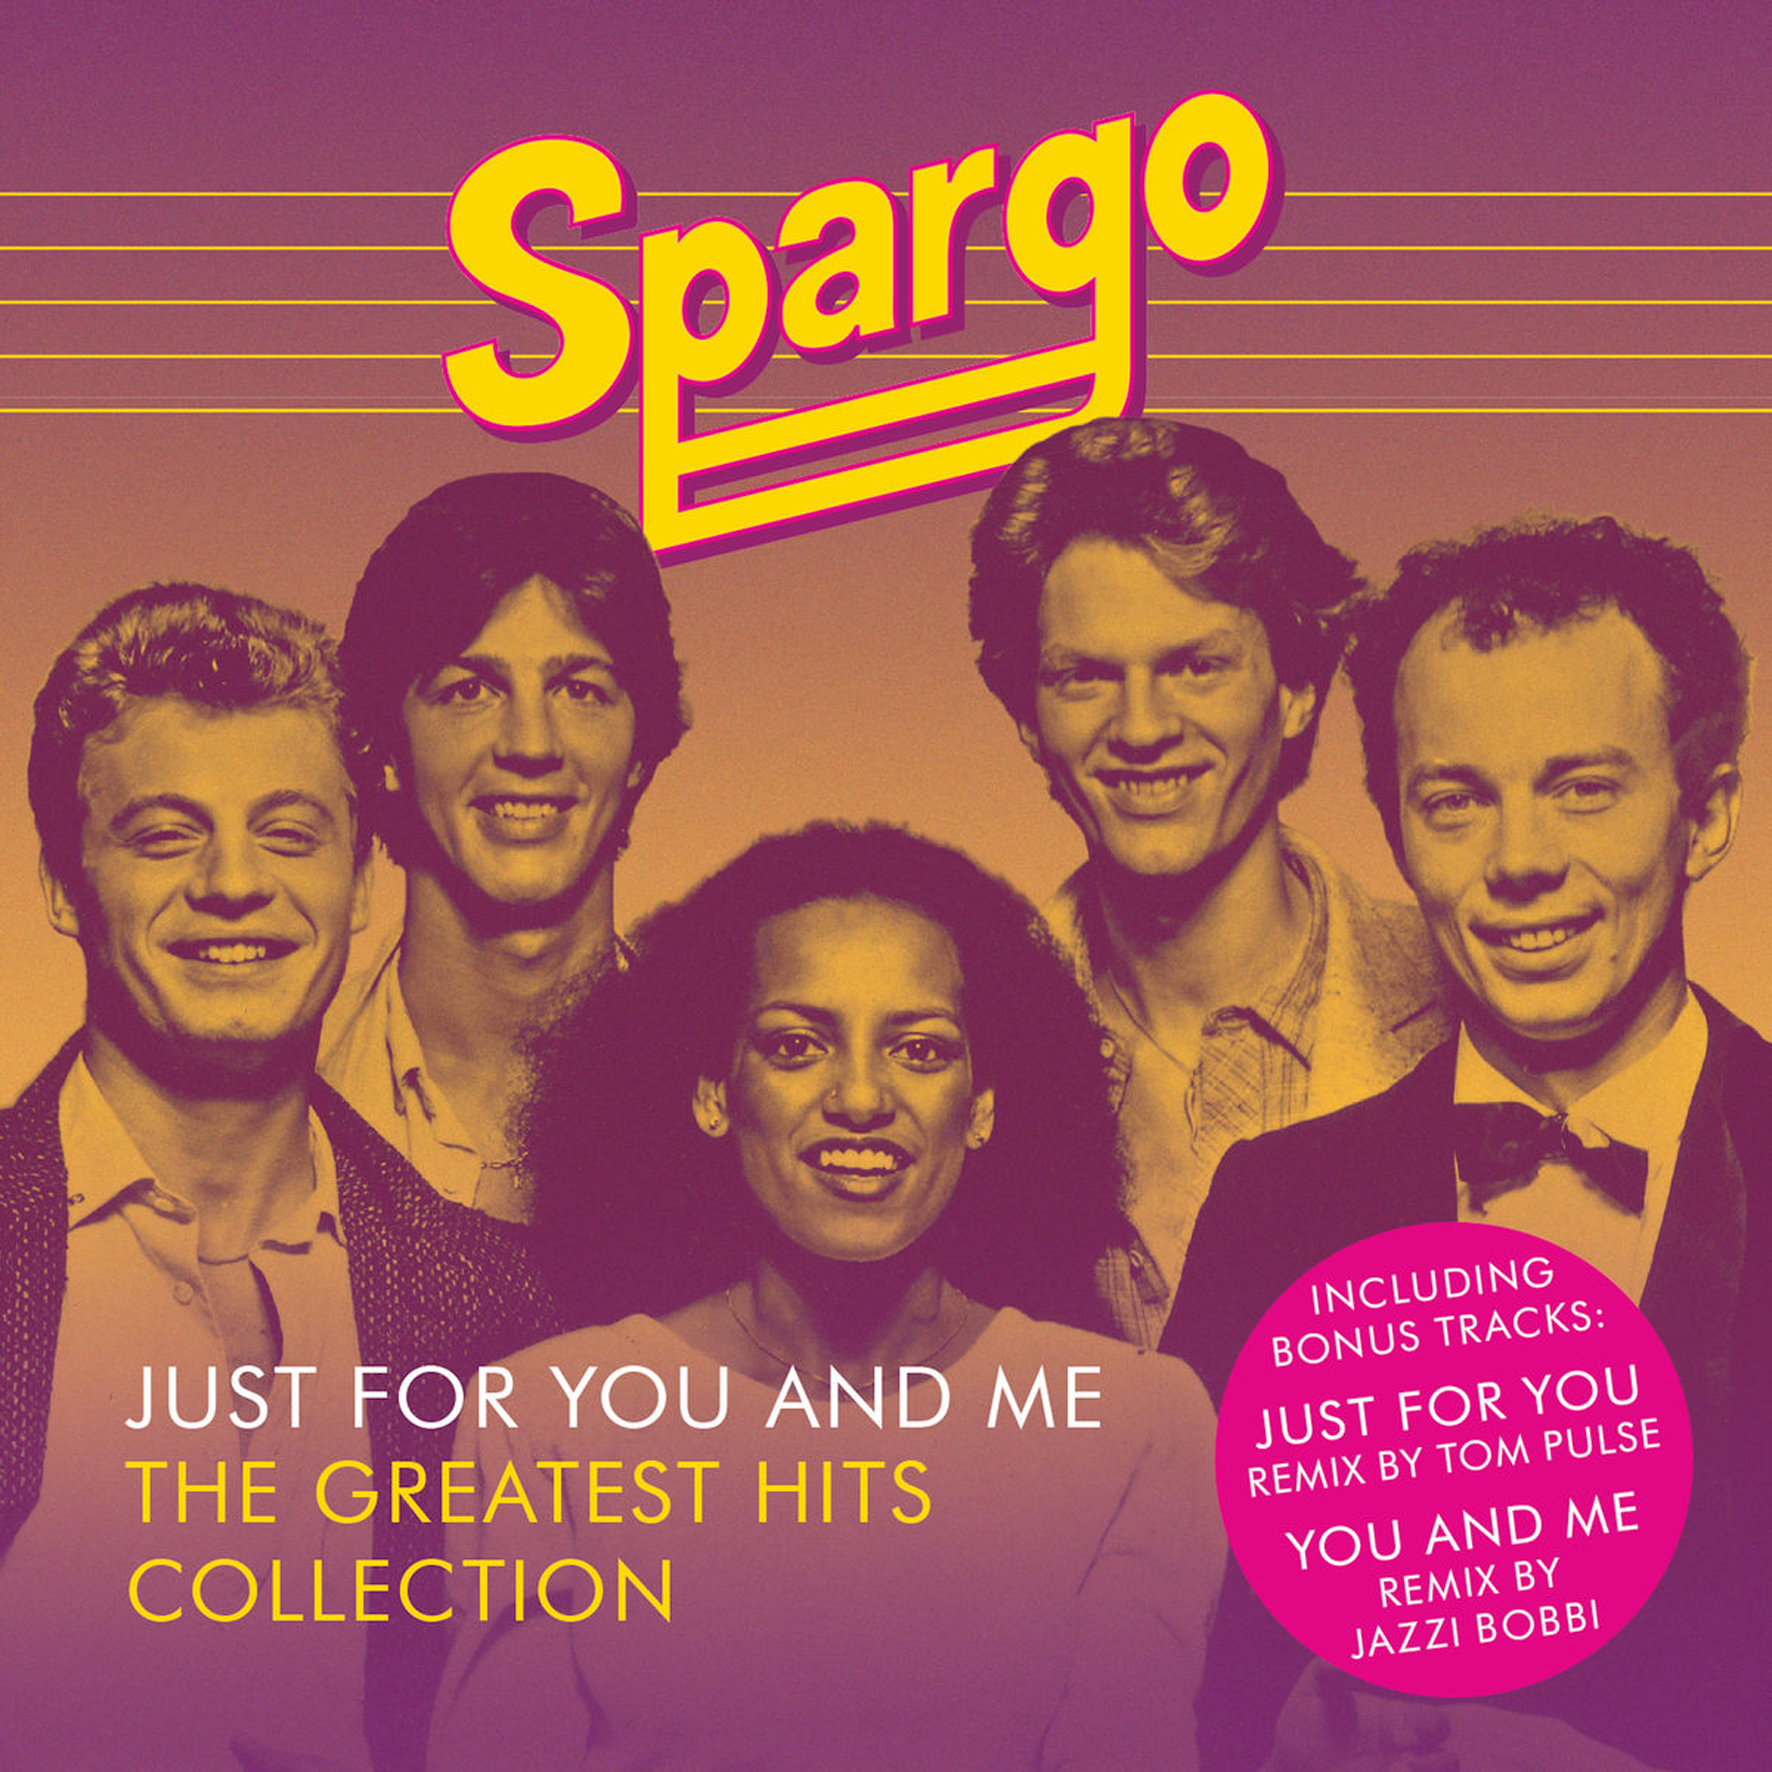 Spargo - The Greatest Hits Collection